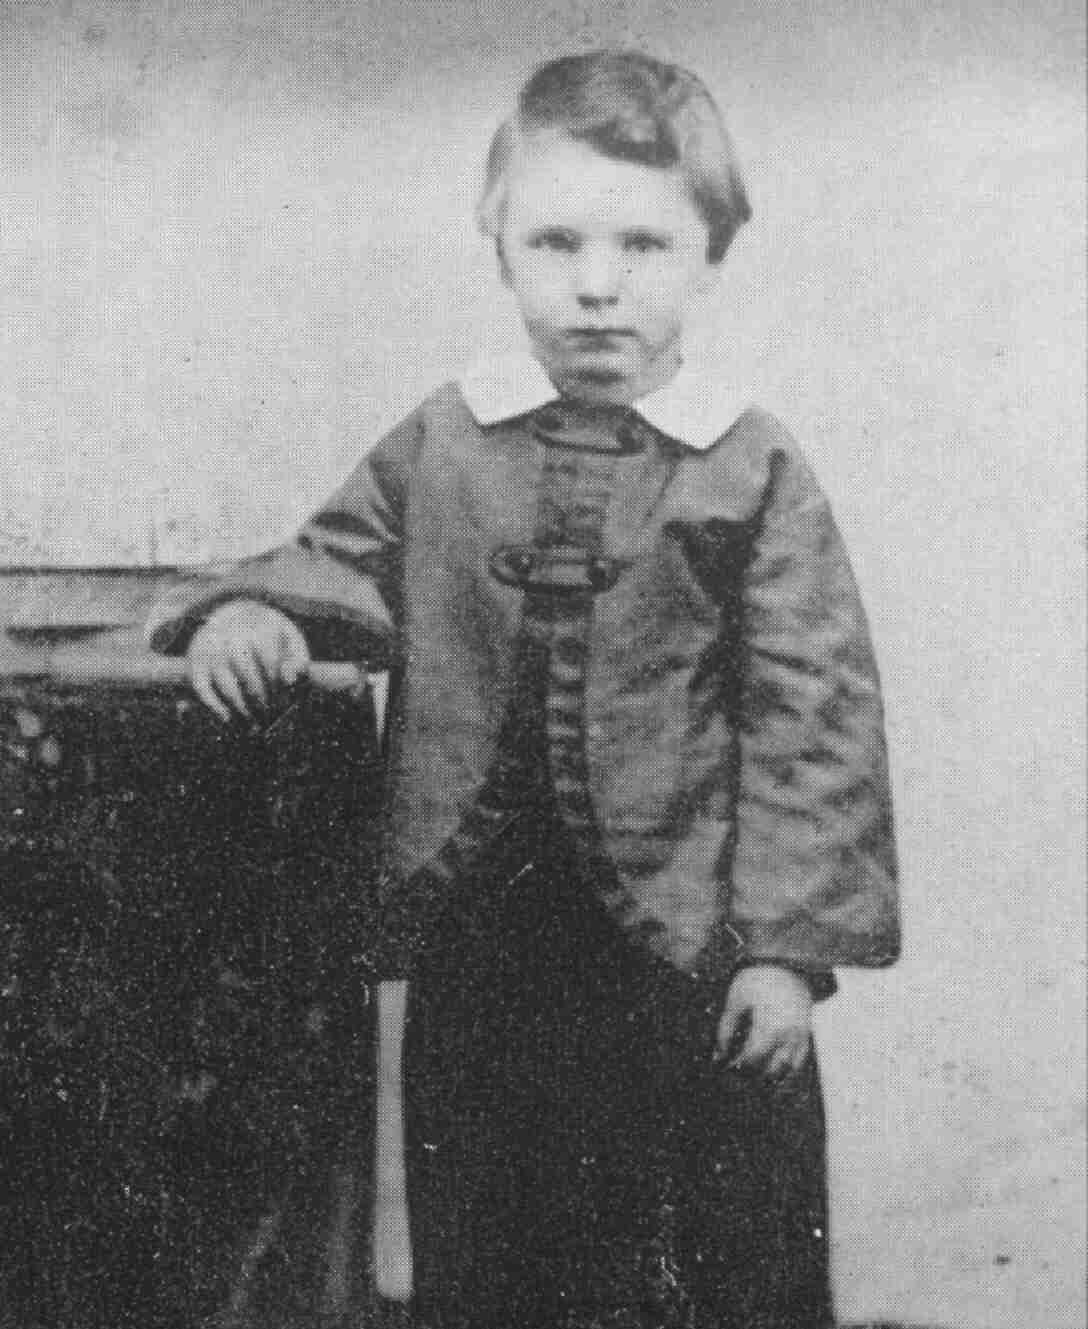 Photograph of William "Willie" Wallace Lincoln, Abraham Lincoln's son.